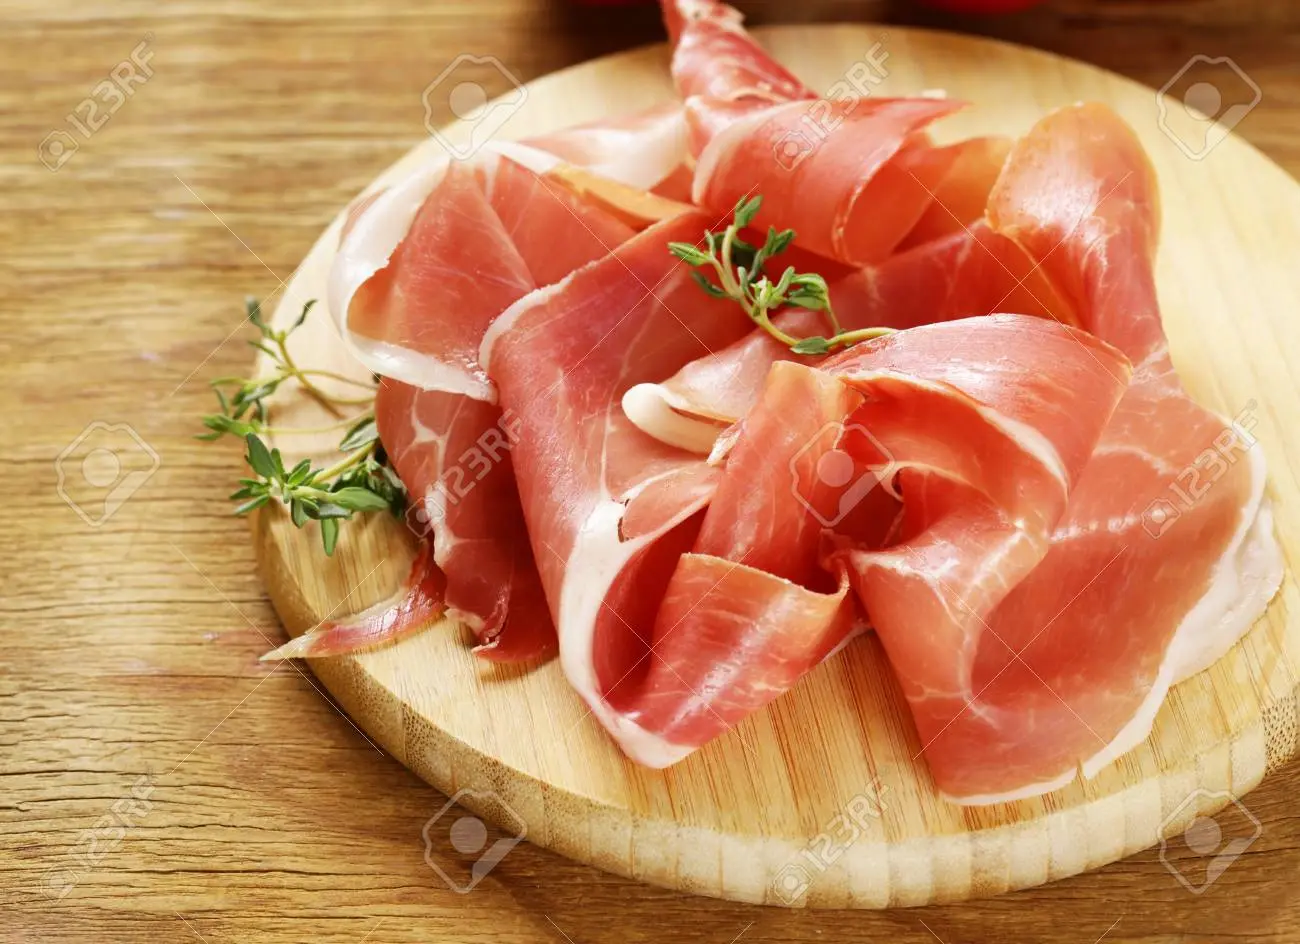 smoked parma ham - Is Parma Ham cooked or raw